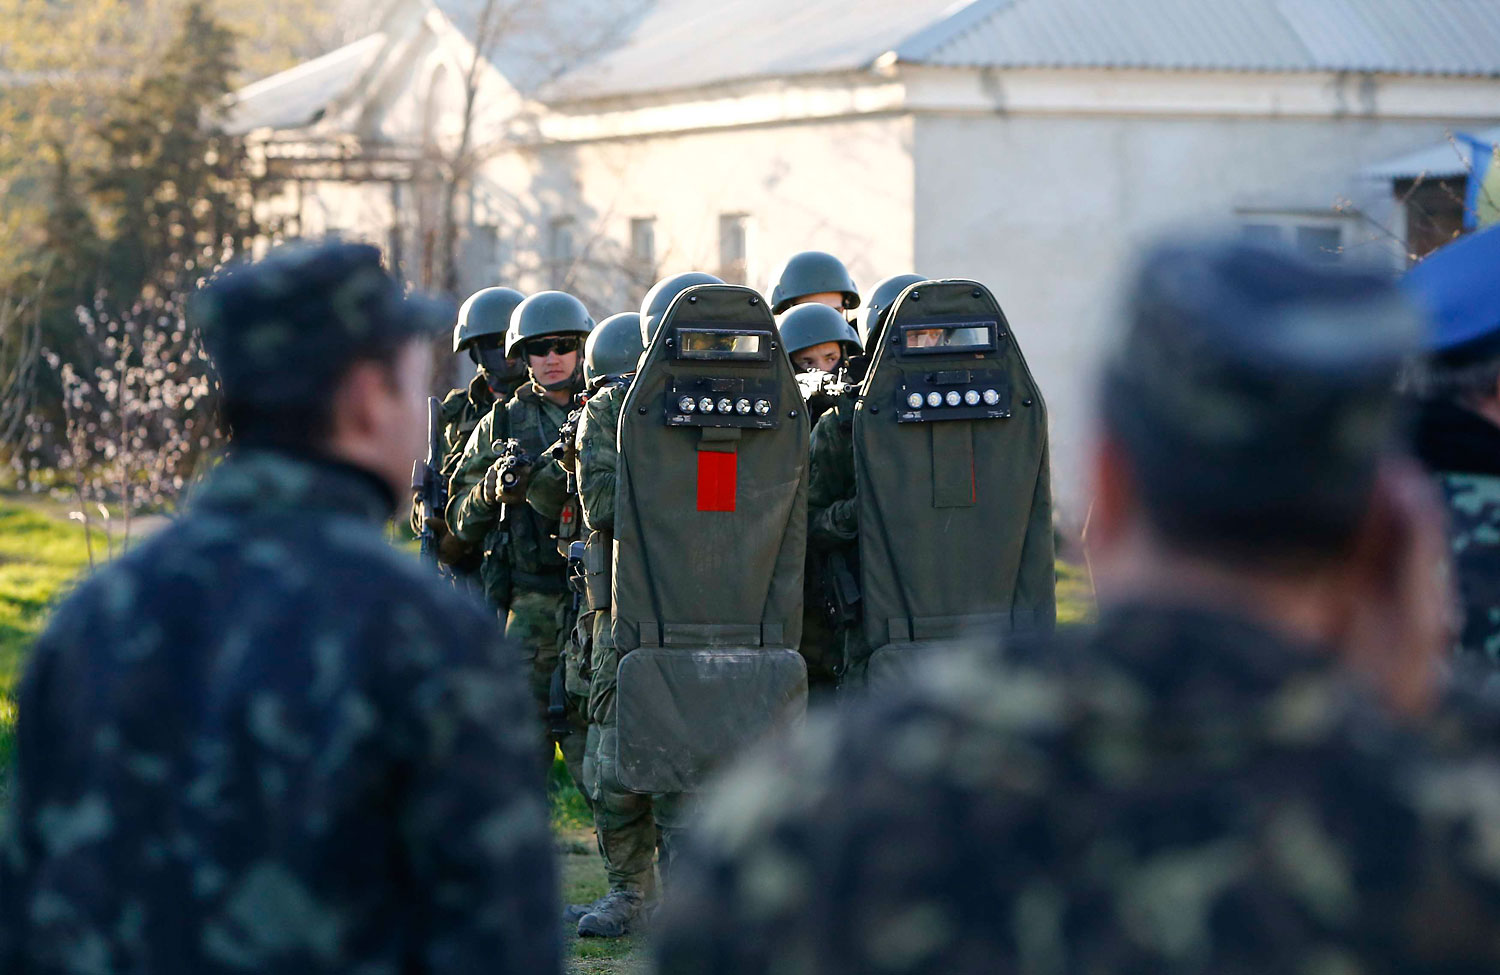 Armed men, believed to be Russian servicemen, stand guard, with Ukrainian servicemen seen in the foreground, at a military airbase, in the Crimean town of Belbek near Sevastopol March 22, 2014. (Shamil Zhumatov—Reuters)